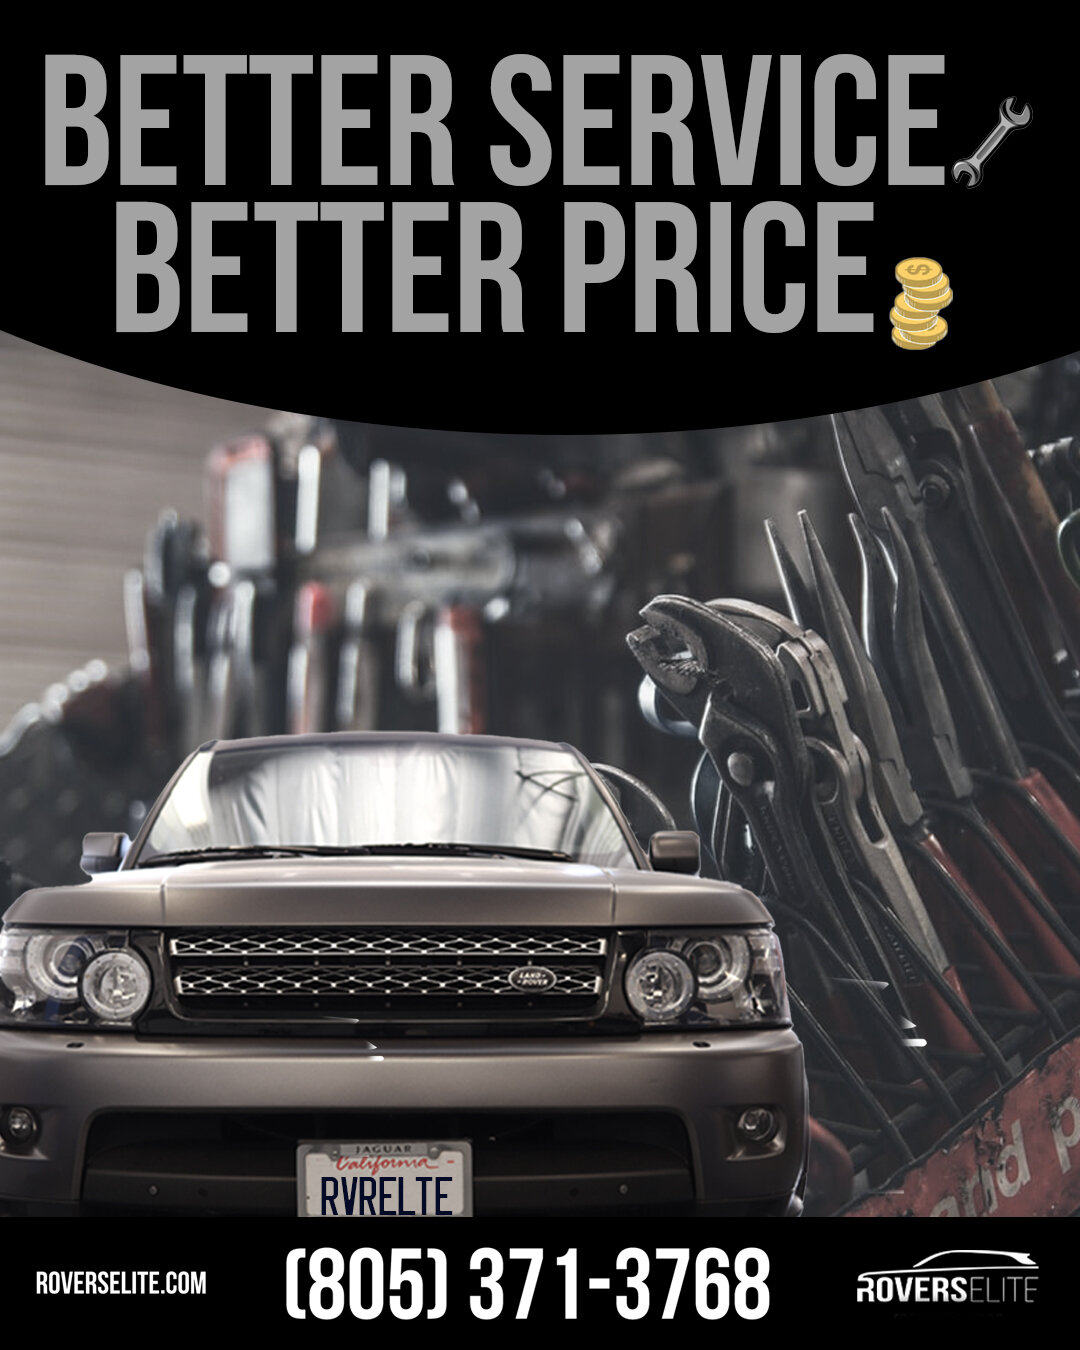 Get a quote in minutes at
RoversElite.com
📲 (805) 371-3768
📍62 N Skyline Dr Unit B
Located in #ThousandOaks

SAME SERVICE, BETTER PRICE 💲
Save 2️⃣5️⃣% or more on average versus your local dealership on Land Rover Service and Repair

CERTIFIED Land